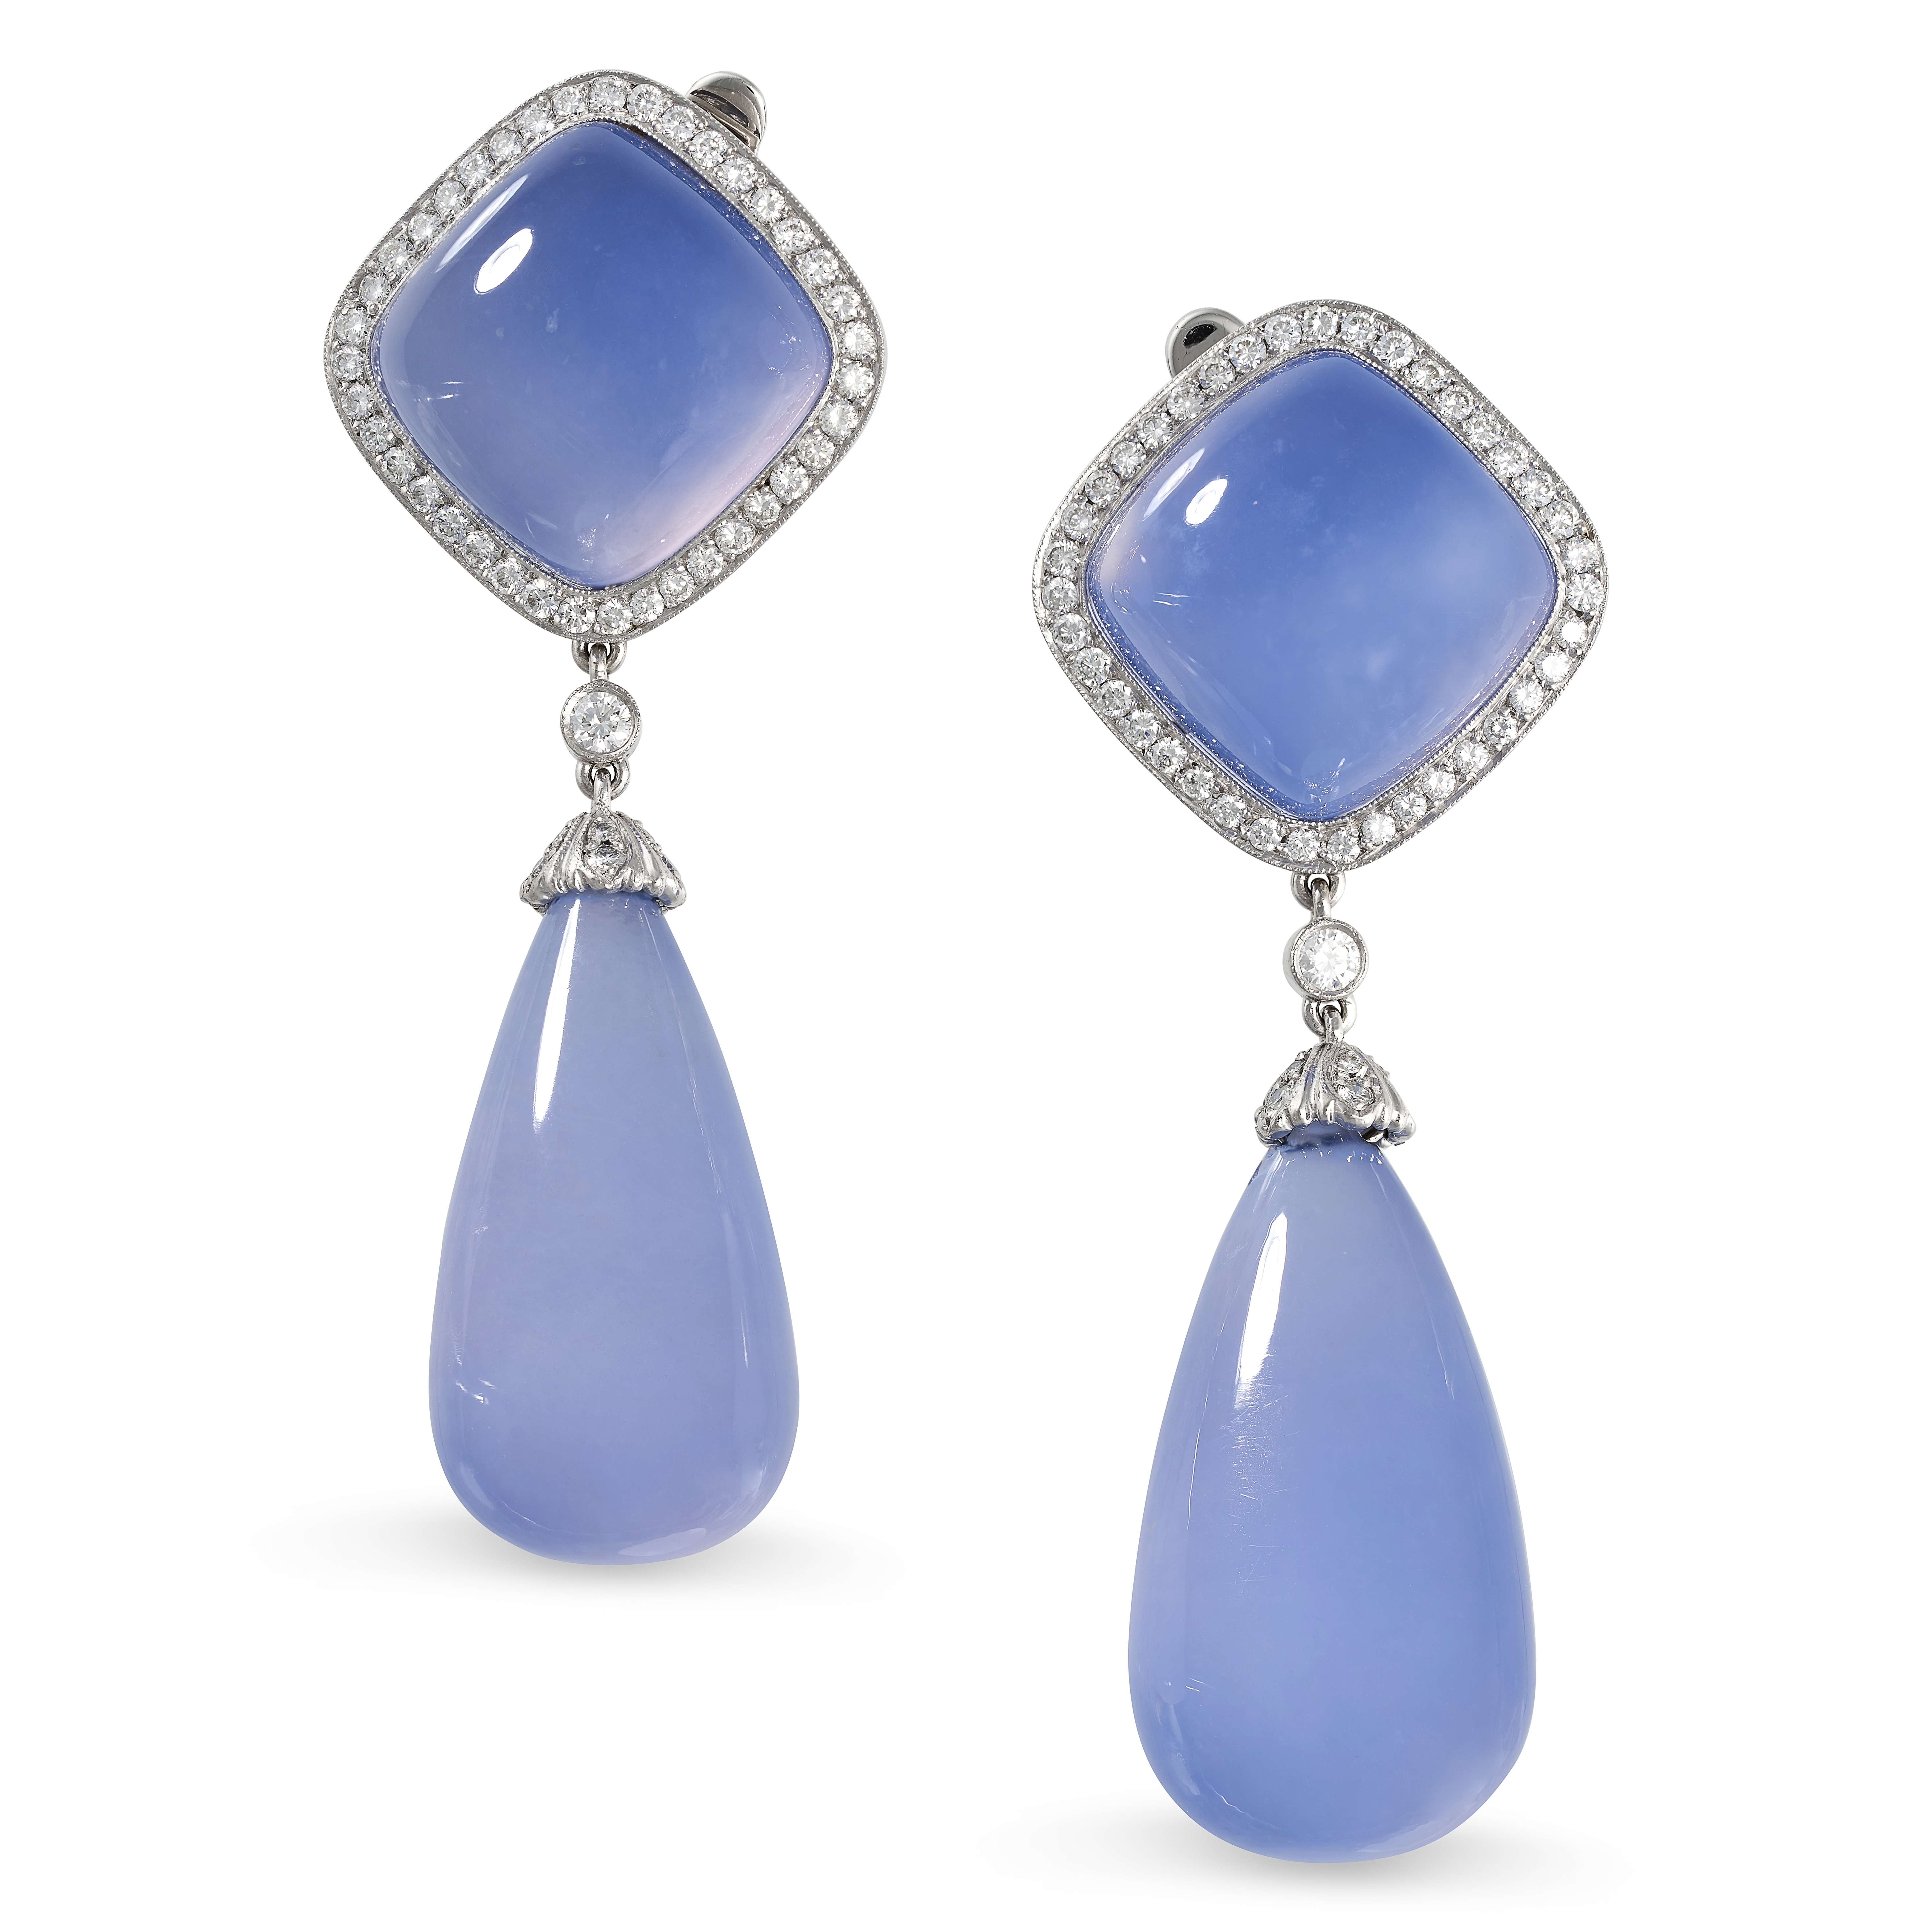 FRED LEIGHTON, A PAIR OF BLUE CHALCEDONY AND DIAMOND DROP EARRINGS in 18ct white gold and platinu...